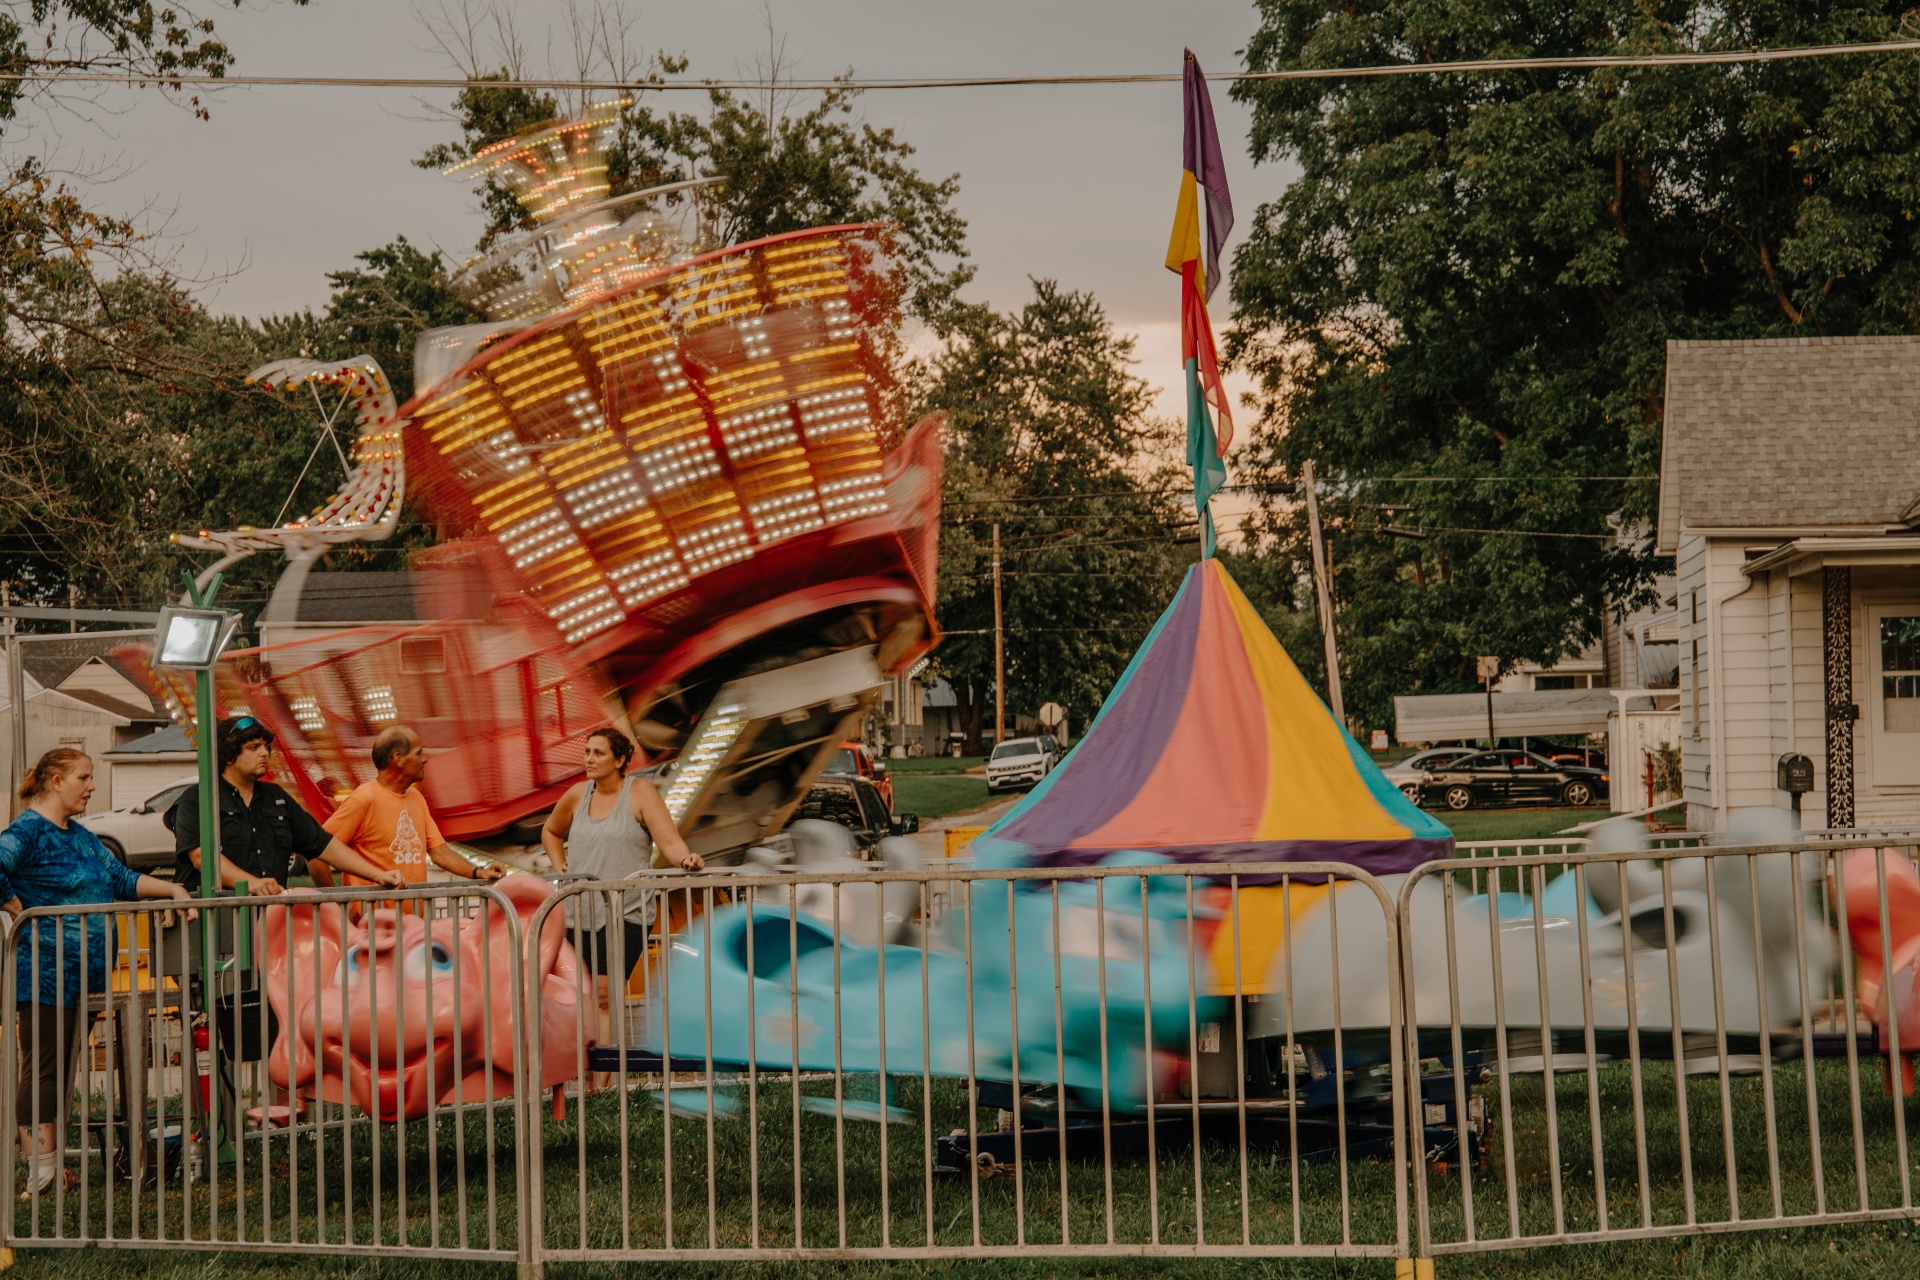 Brightly colored carnival rides